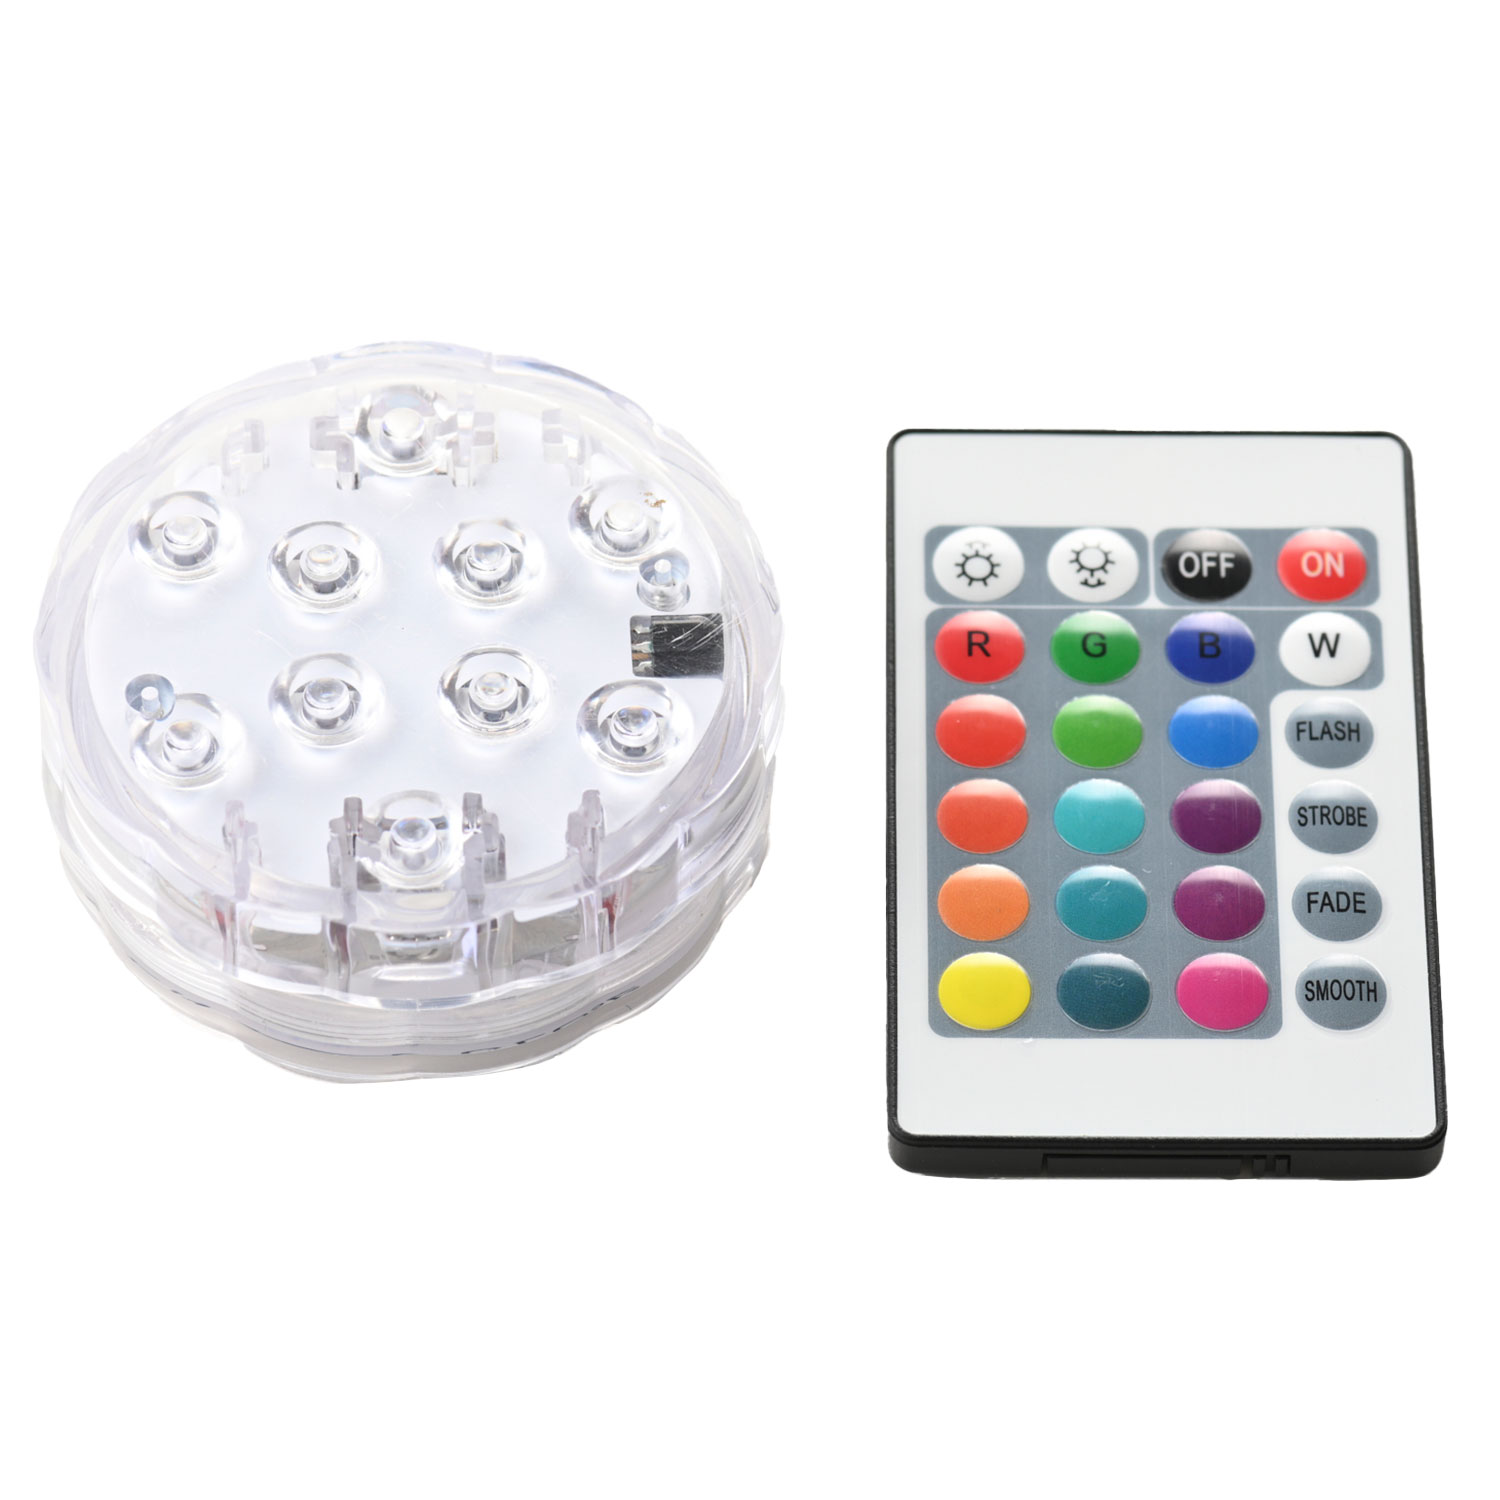 T10-3117《Glass Mosaic Art》 LED light 16 colors, gradation, flashing/with remote control (set)